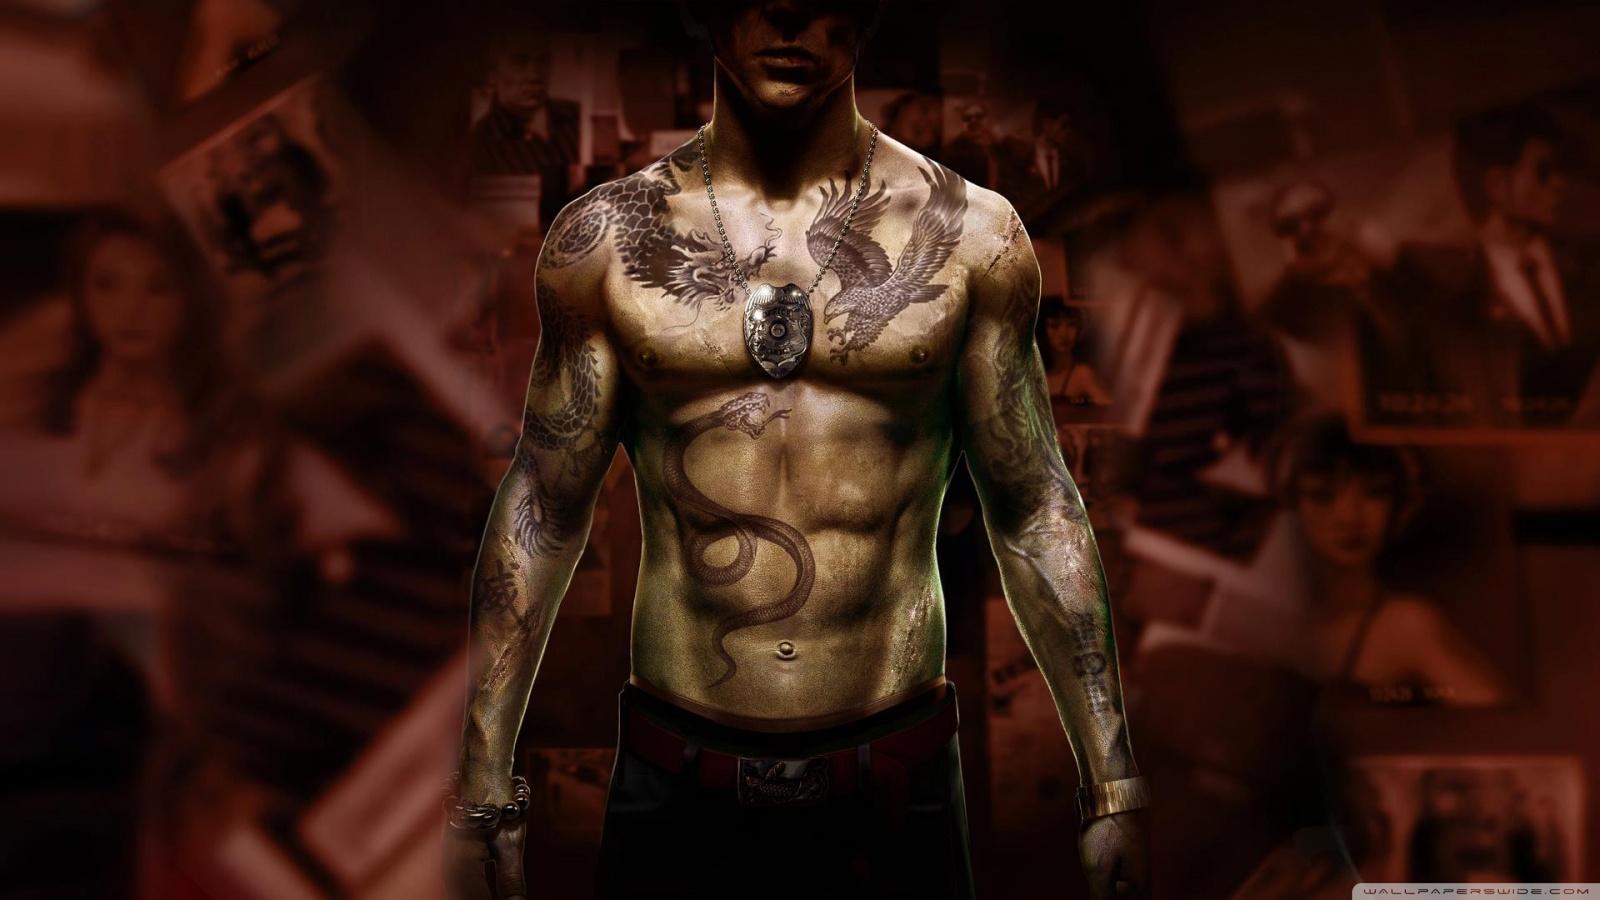 1080p sleeping dogs images